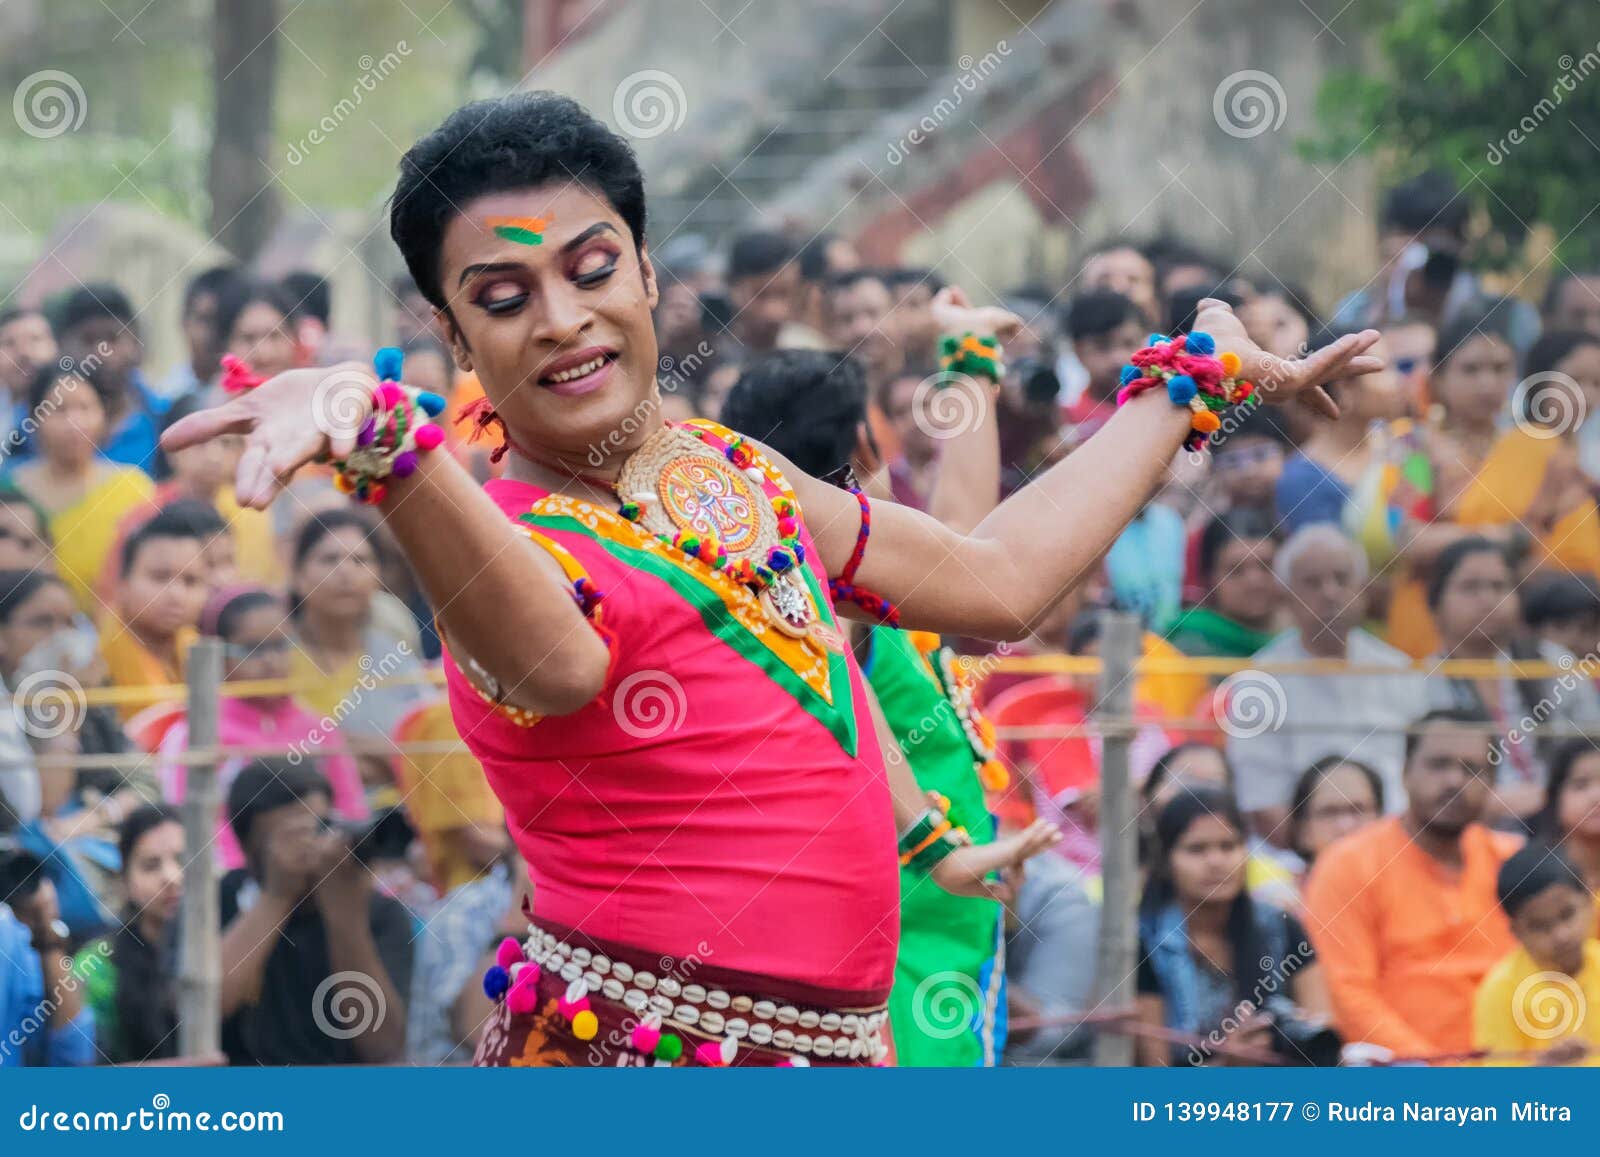 Young Man Dancing At Holi Spring Festival Editorial Photography